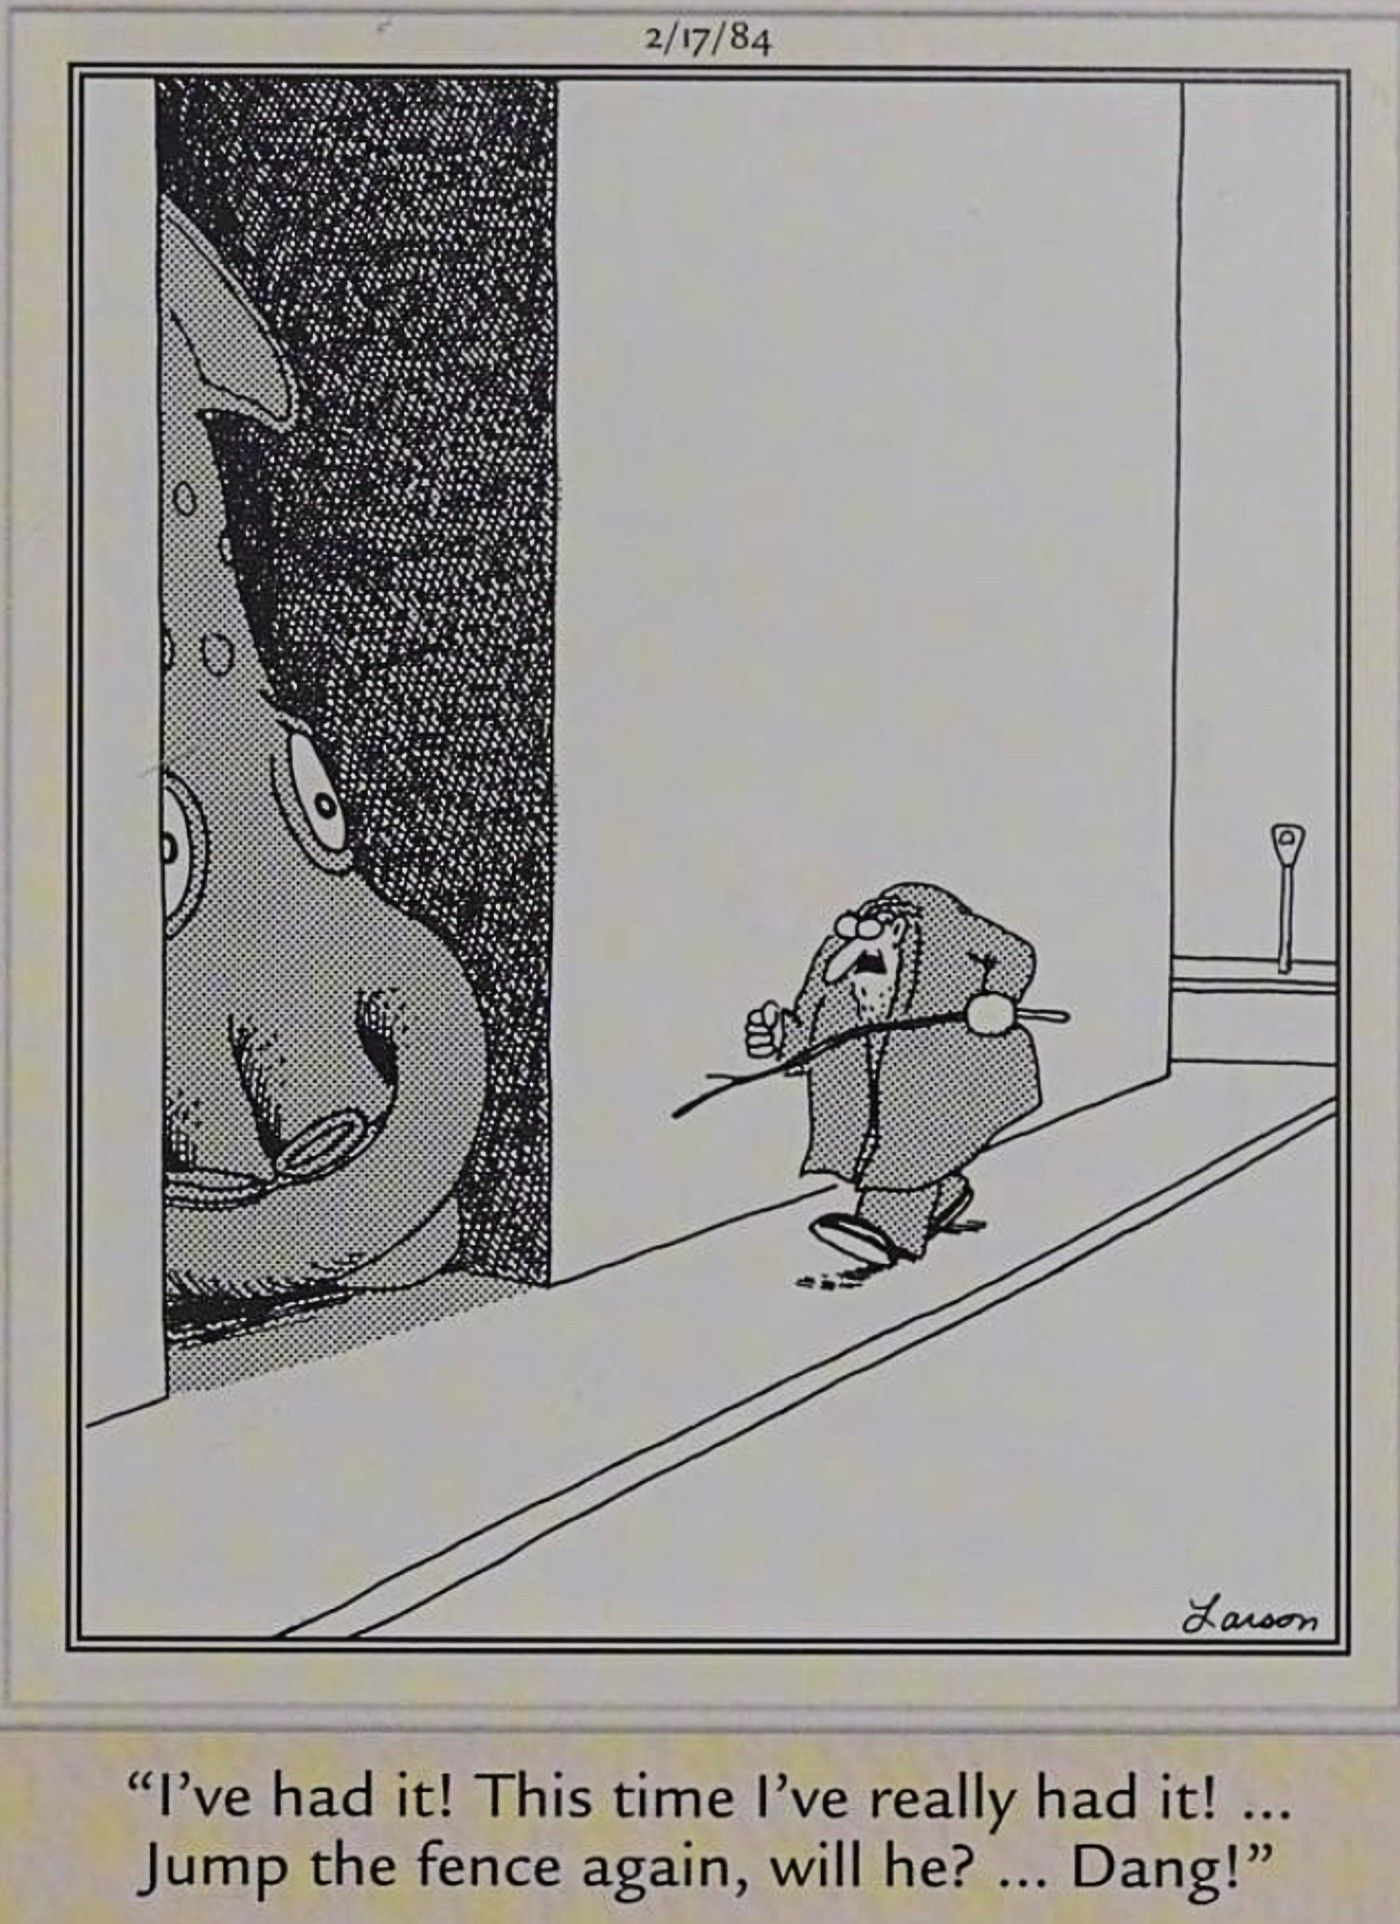 The Far Side featuring a man looking for a giant squid in the city.